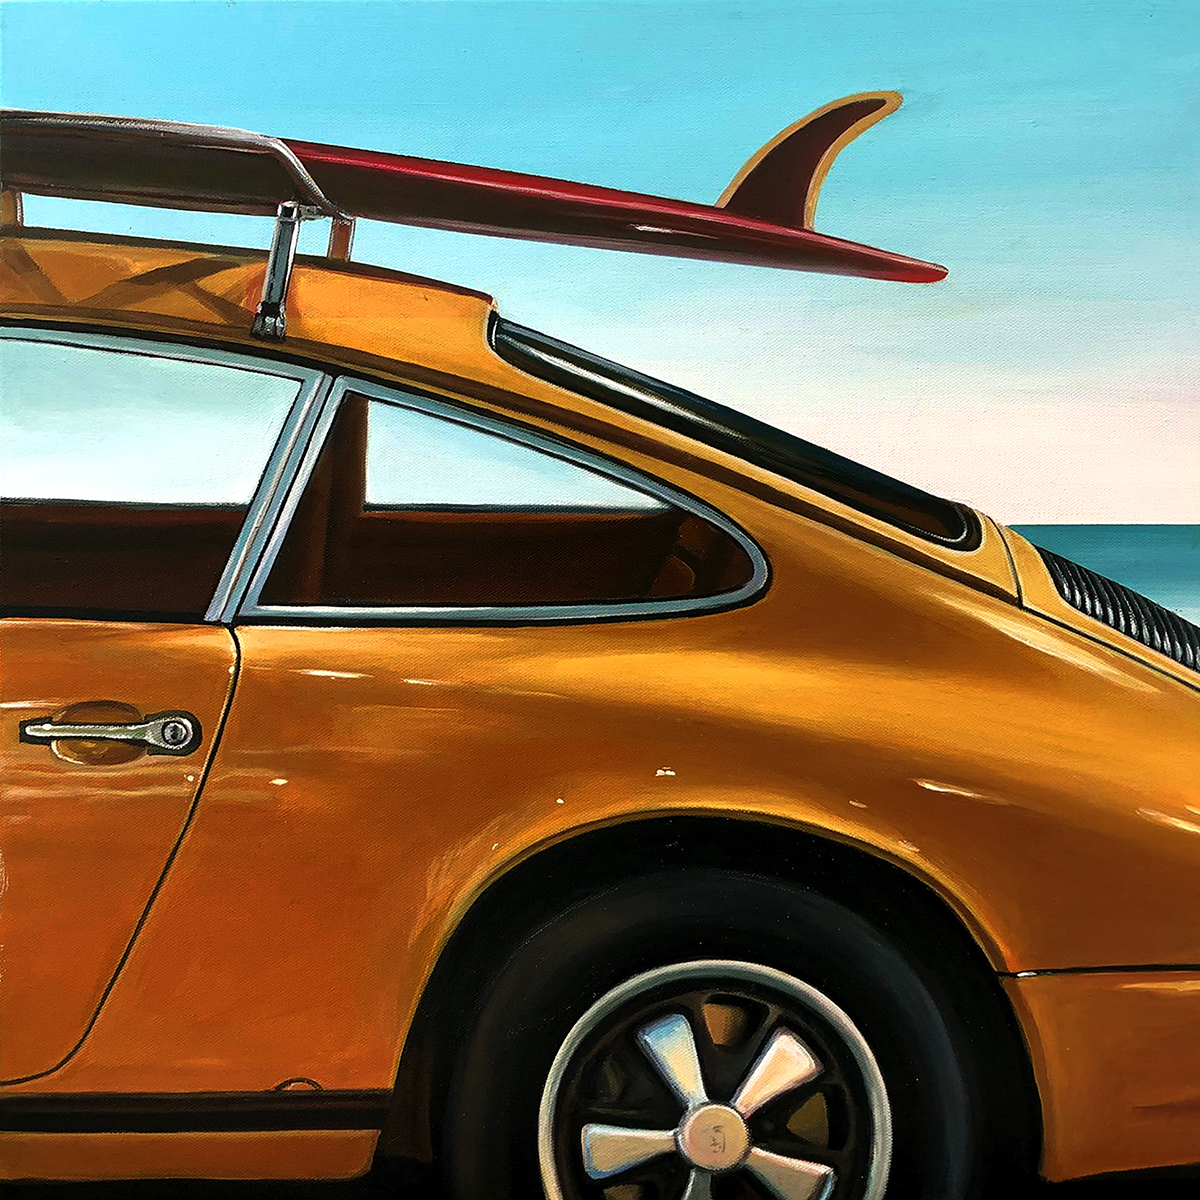 Fabriano Porsche 911 jaune avec surf Oil and acrylic on canvas